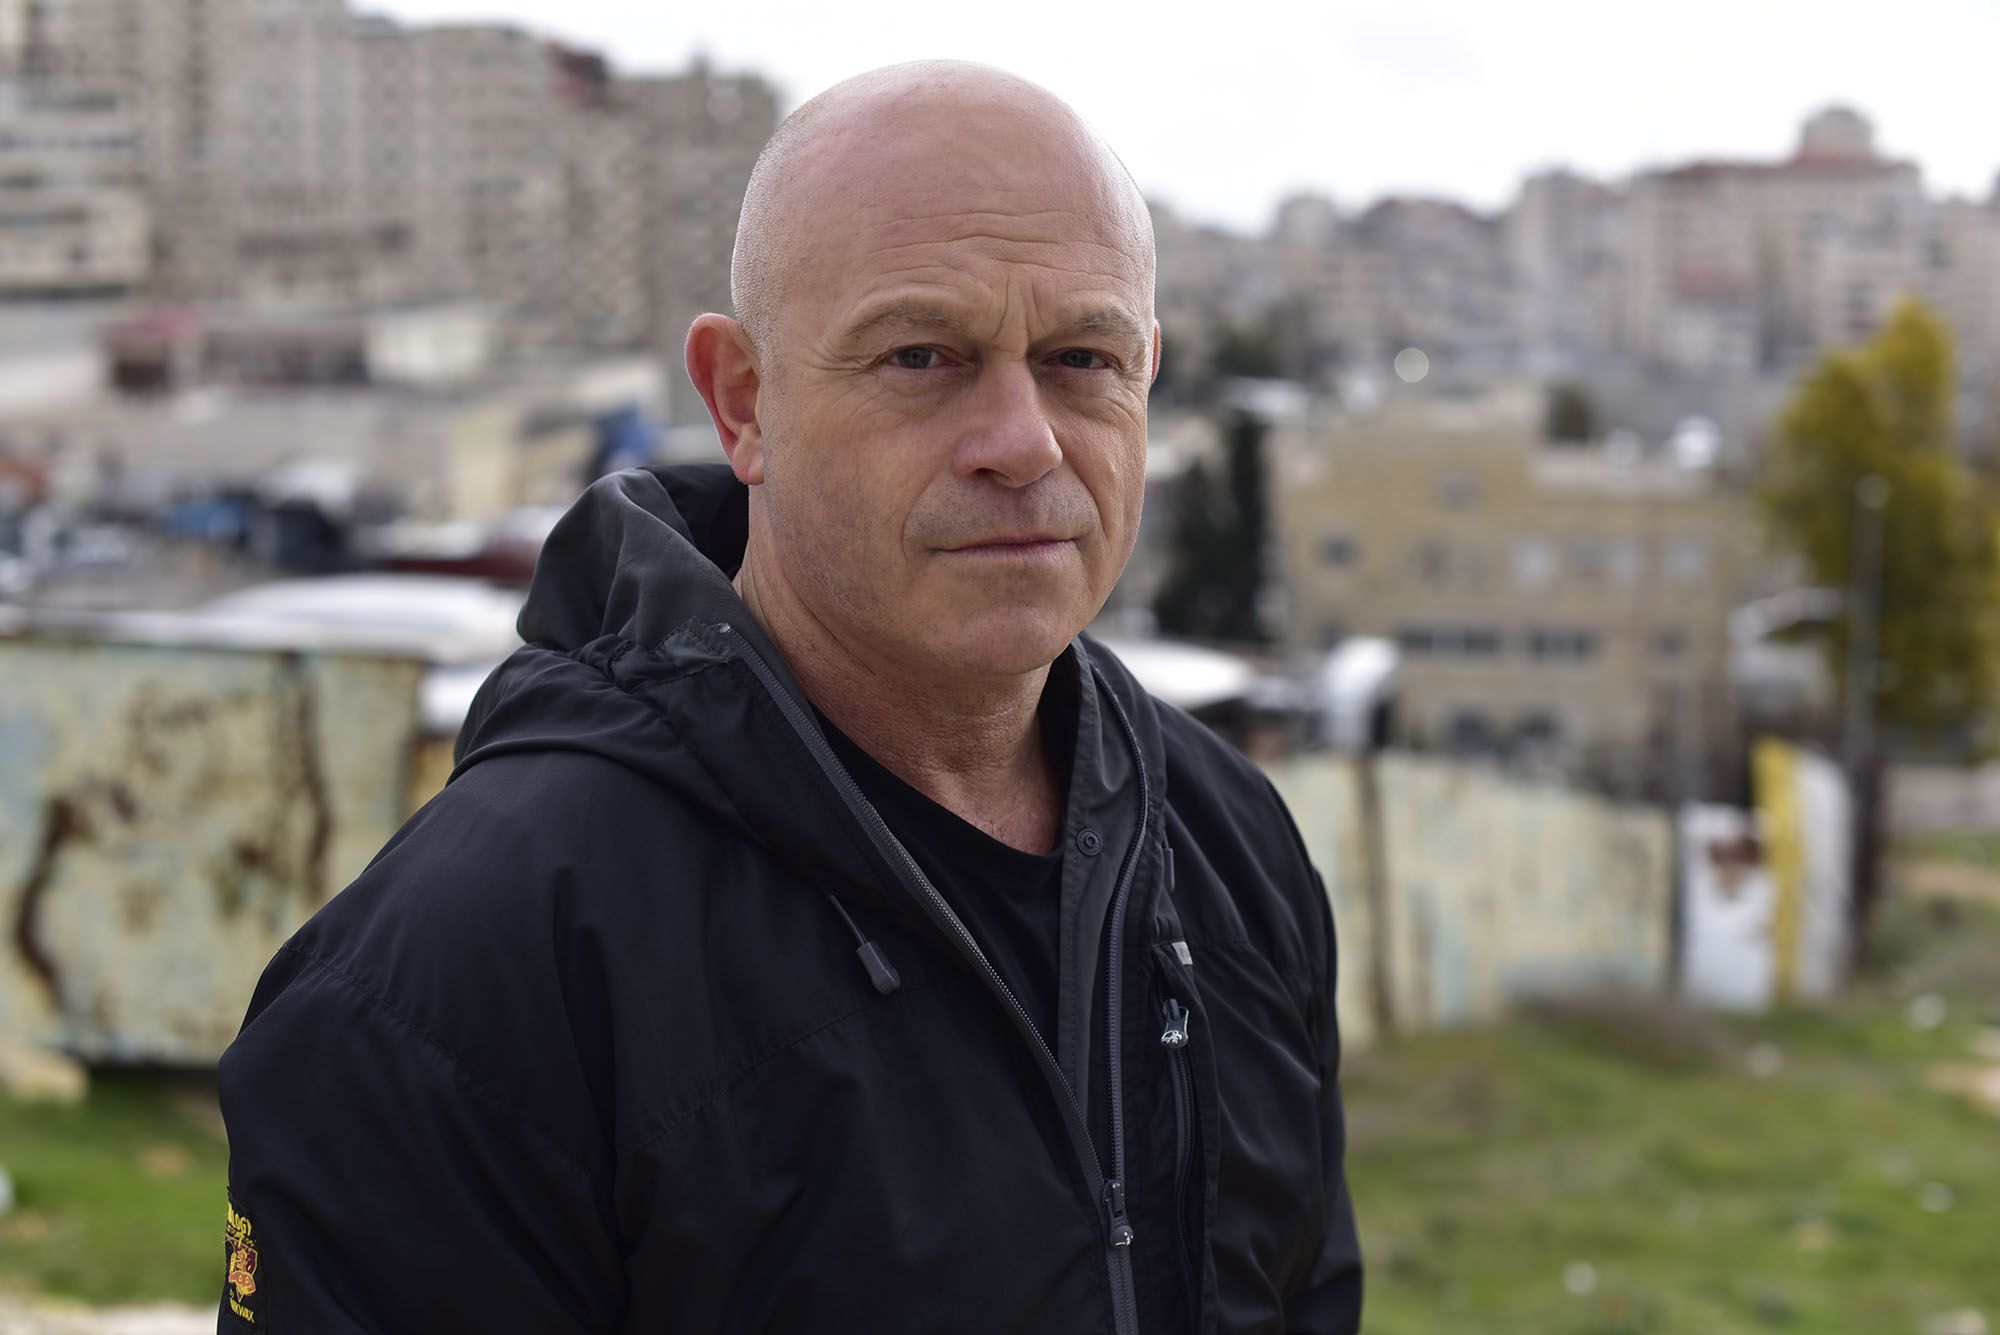 Ross Kemp: Extreme World review – TV tough guy tackles racial inequality, Television